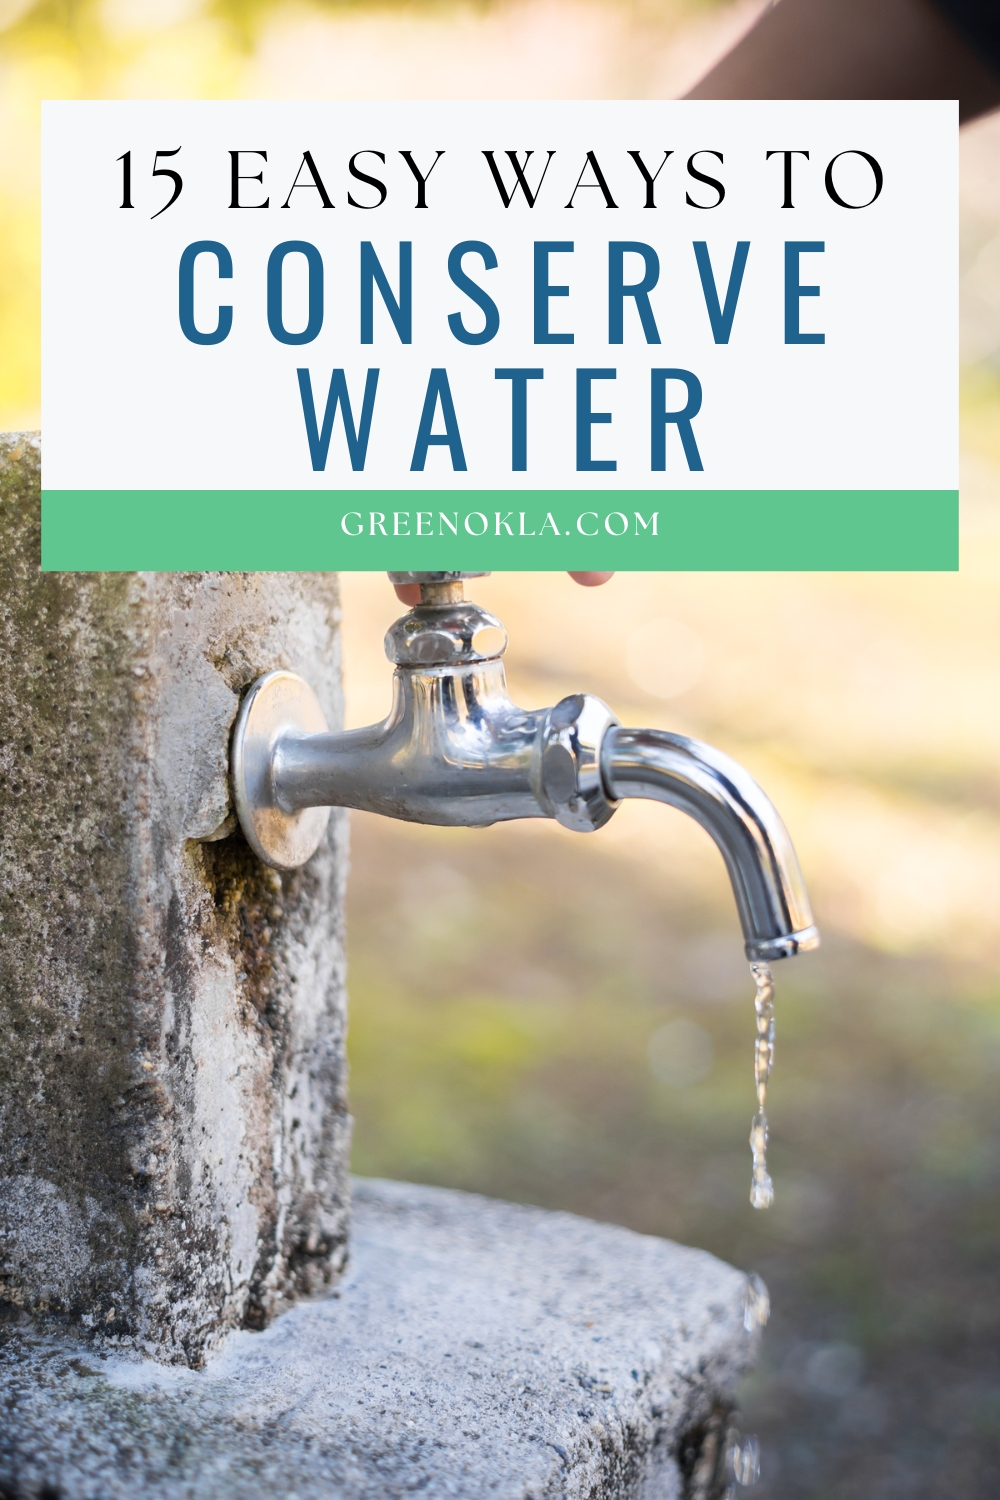 person turning off outdoor faucet with text overlay 15 easy ways to conserve water